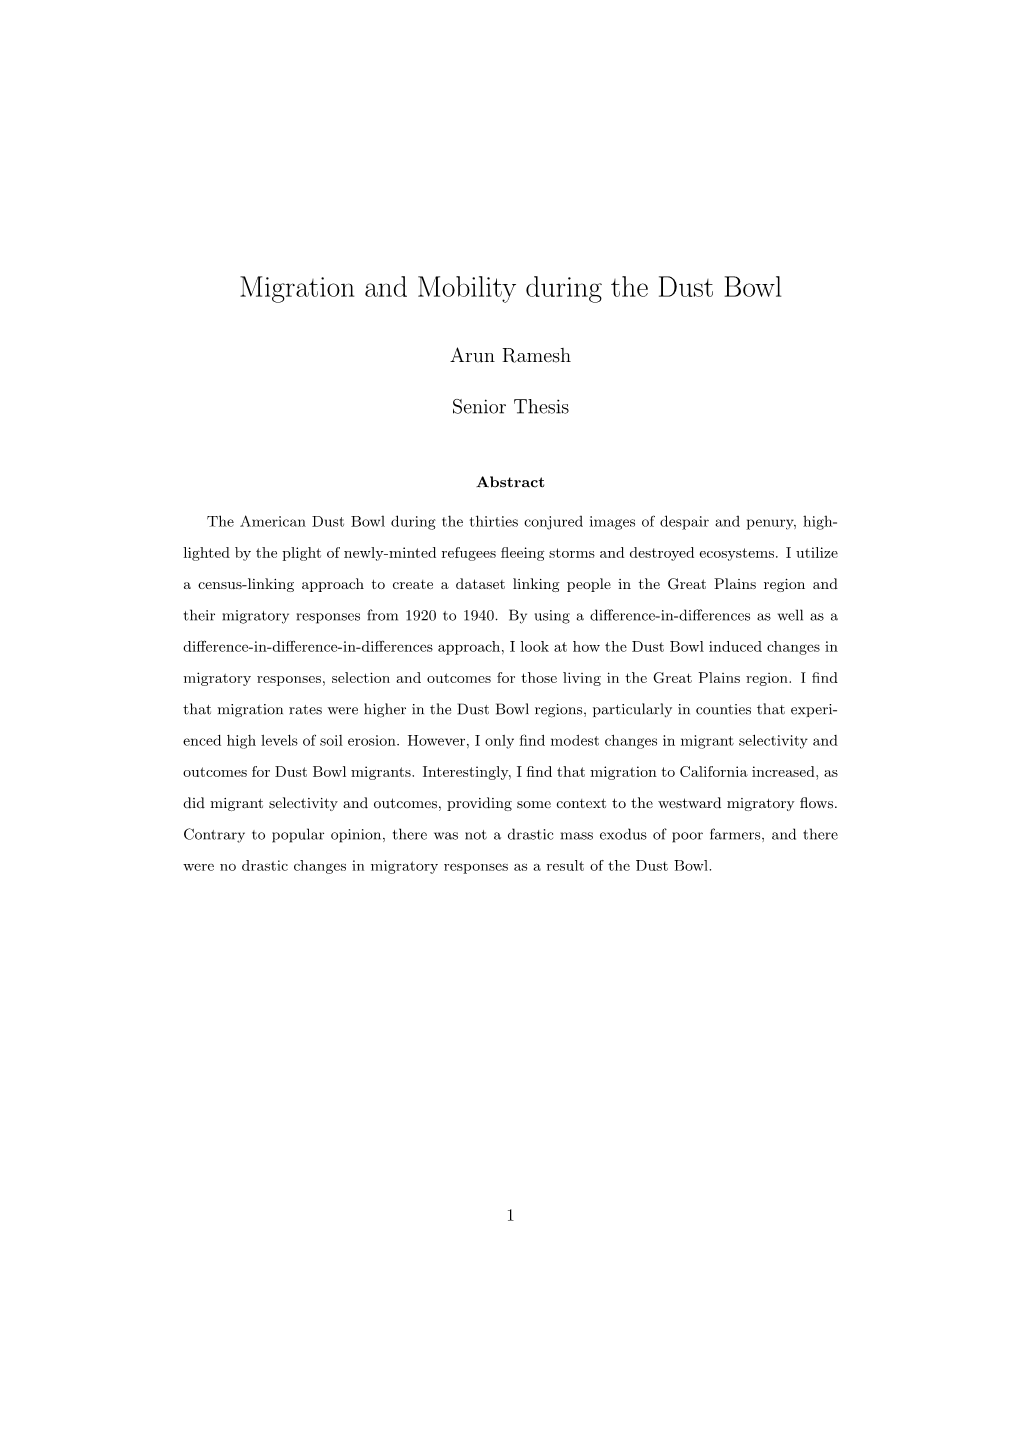 Migration and Mobility During the Dust Bowl